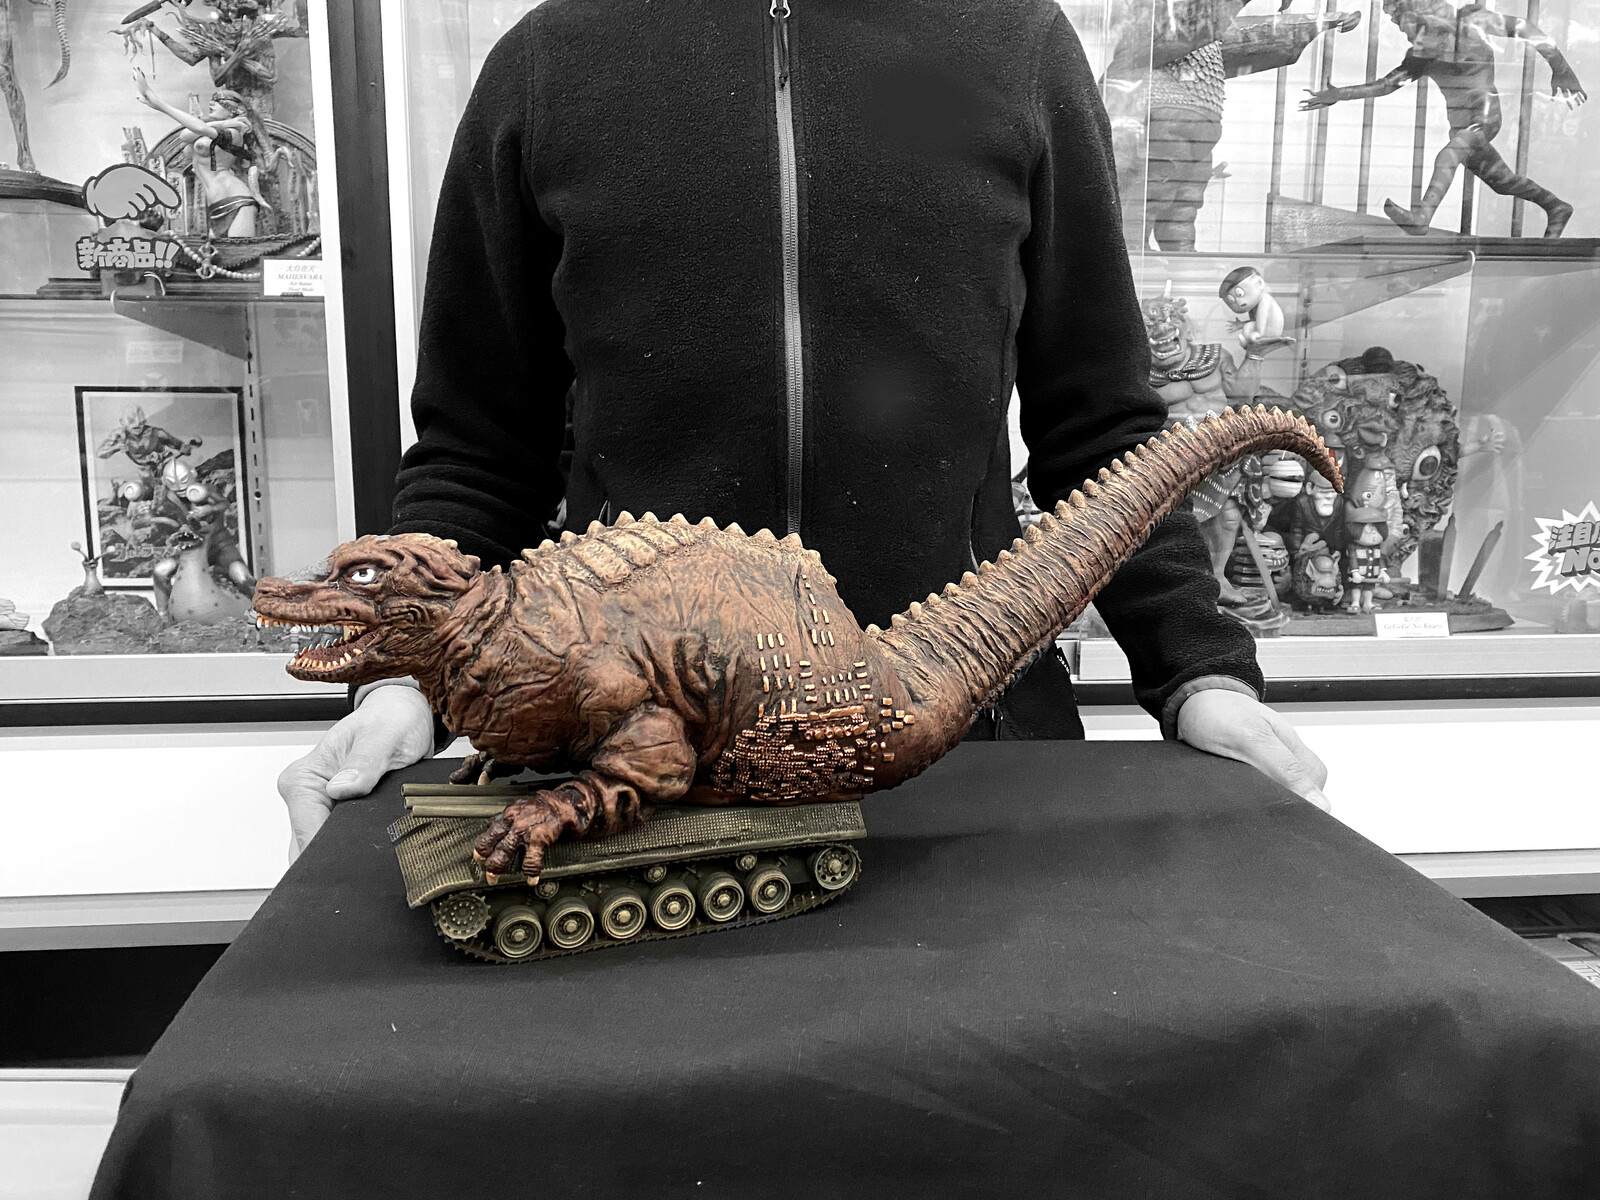 Dinosaur Tank Art Statue 「恐竜戦車」完成品
This piece is hand-painted and finished, 
with its own unique quality and detail 
that is the trademark of a handcrafted 
Art Of Toys custom product.
https://www.solidartclub.club/ 